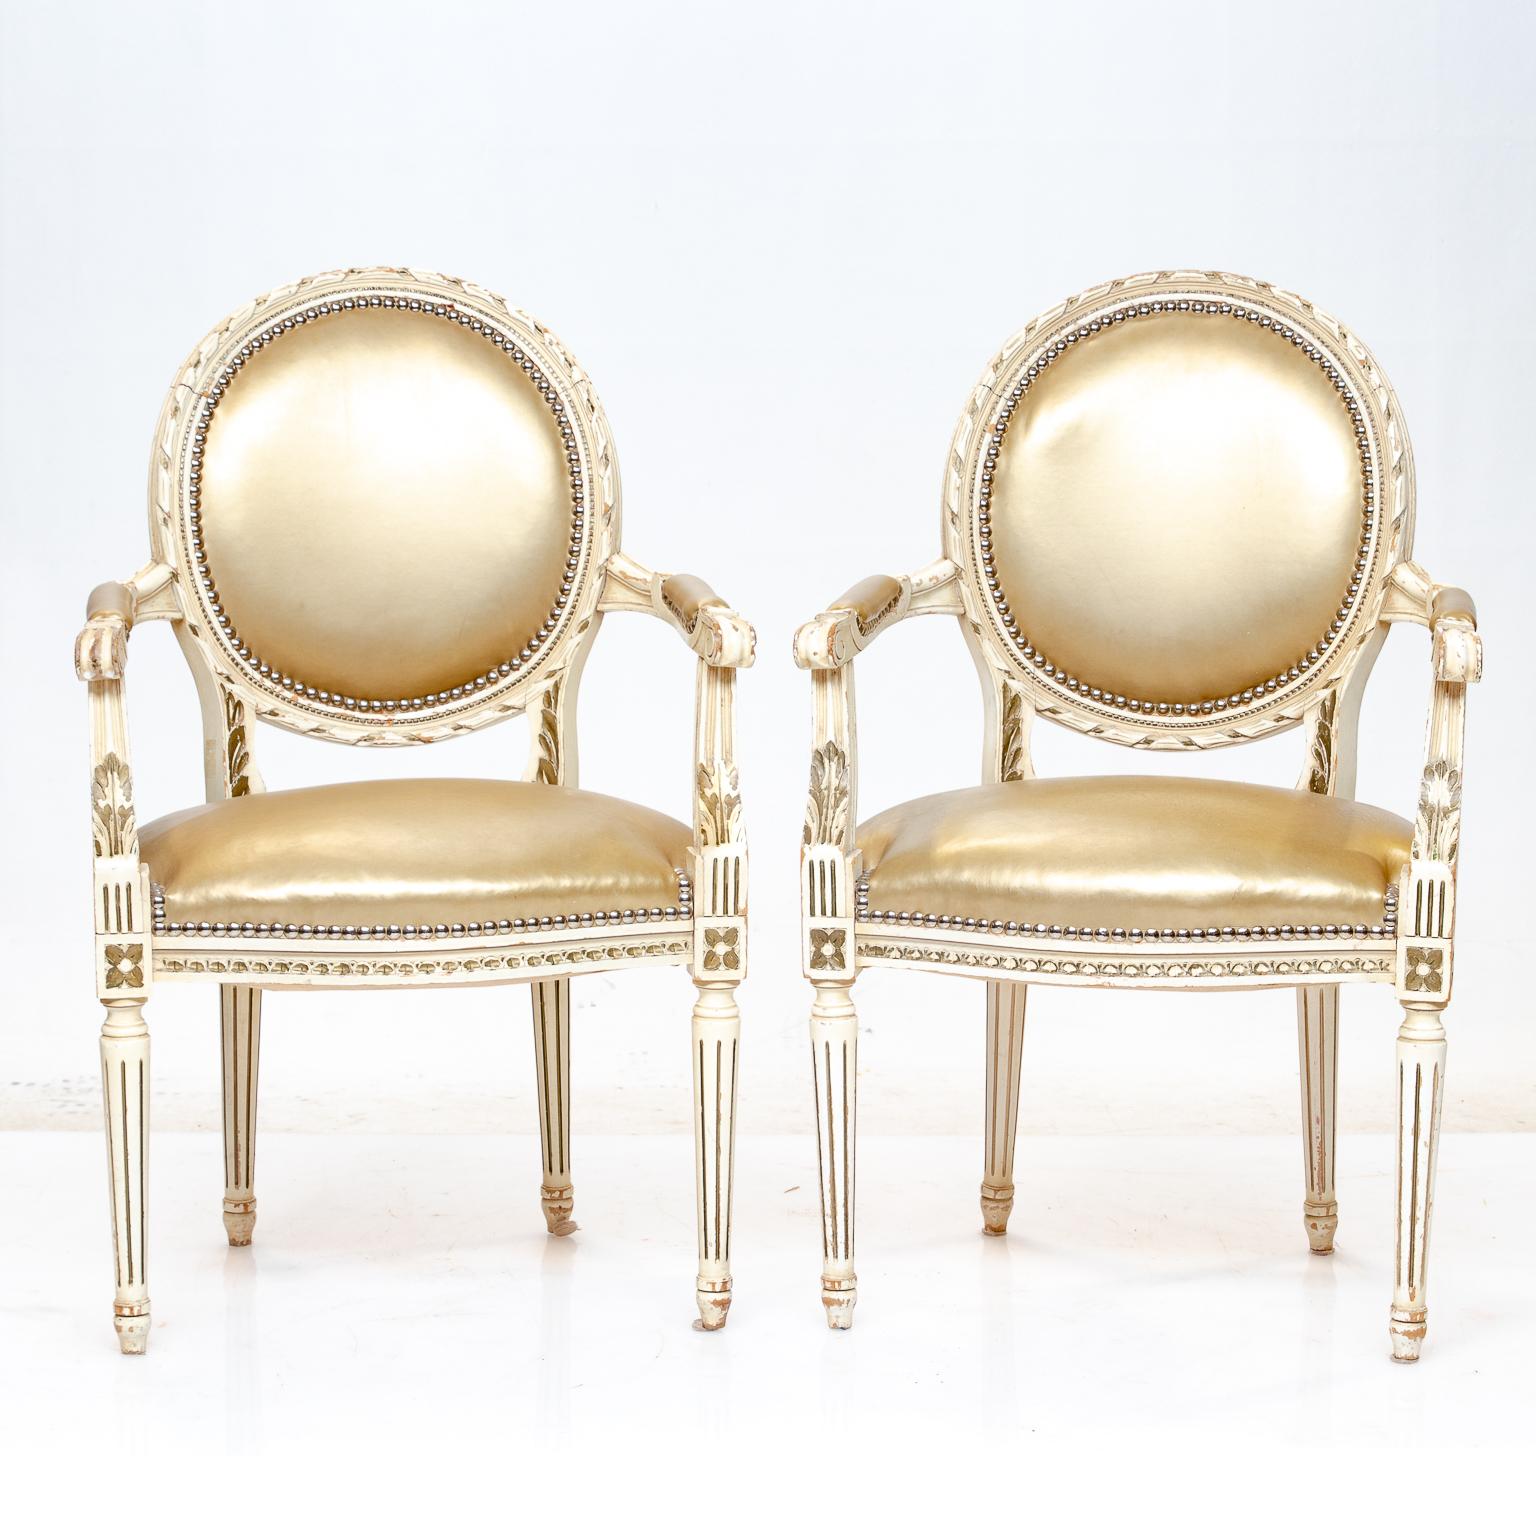 Vintage pair of Louis XVI armchairs
Louis XVI painted armchairs highlighted with gold accents and silver nailheads. Upholstery is fairly recent, good condition with a shinney gold look. Very sound condition.